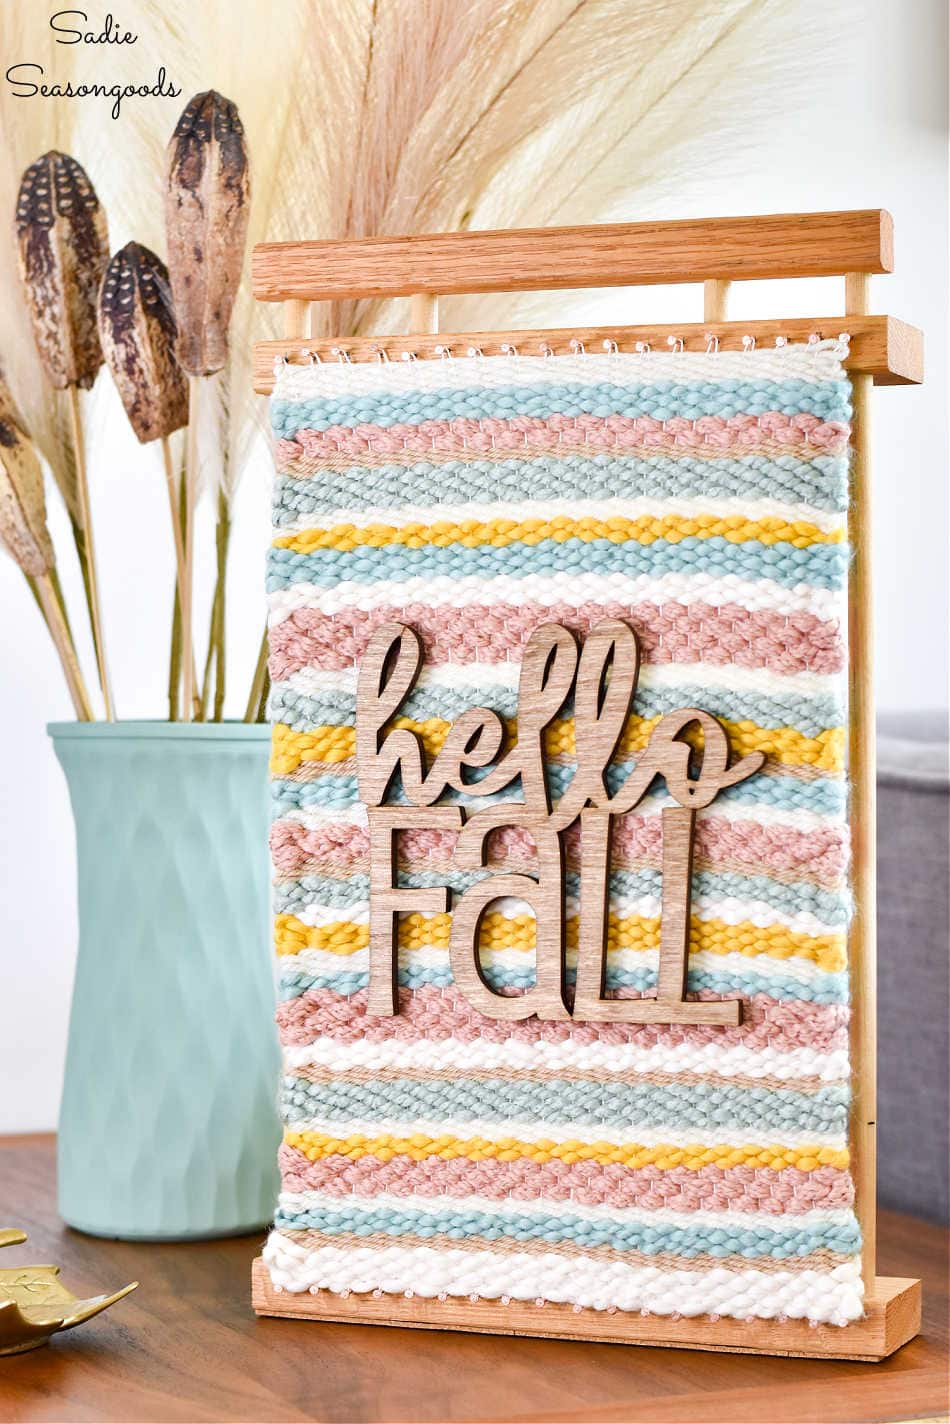 displaying a hello fall sign on a casserole dish holder that was upcycled into a diy loom